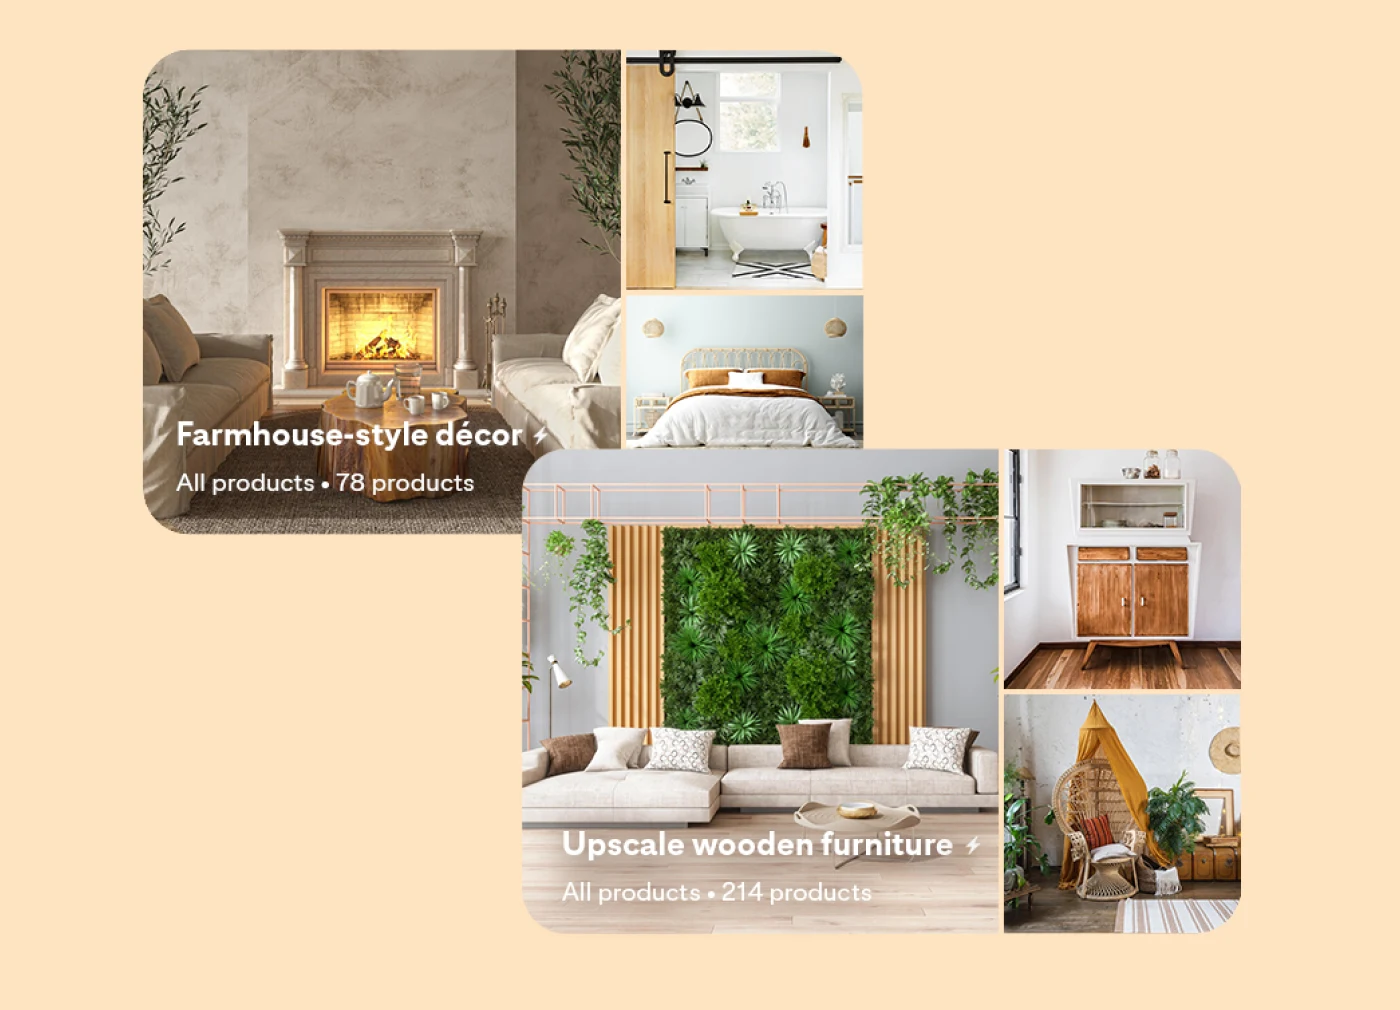 Two Pinterest boards side by side: One for farmhouse-style décor with three photos; a living room, bedroom and bathroom. The second board highlights upscale wooden furniture, including a living room, modern chest of drawers and a tasteful chair. 